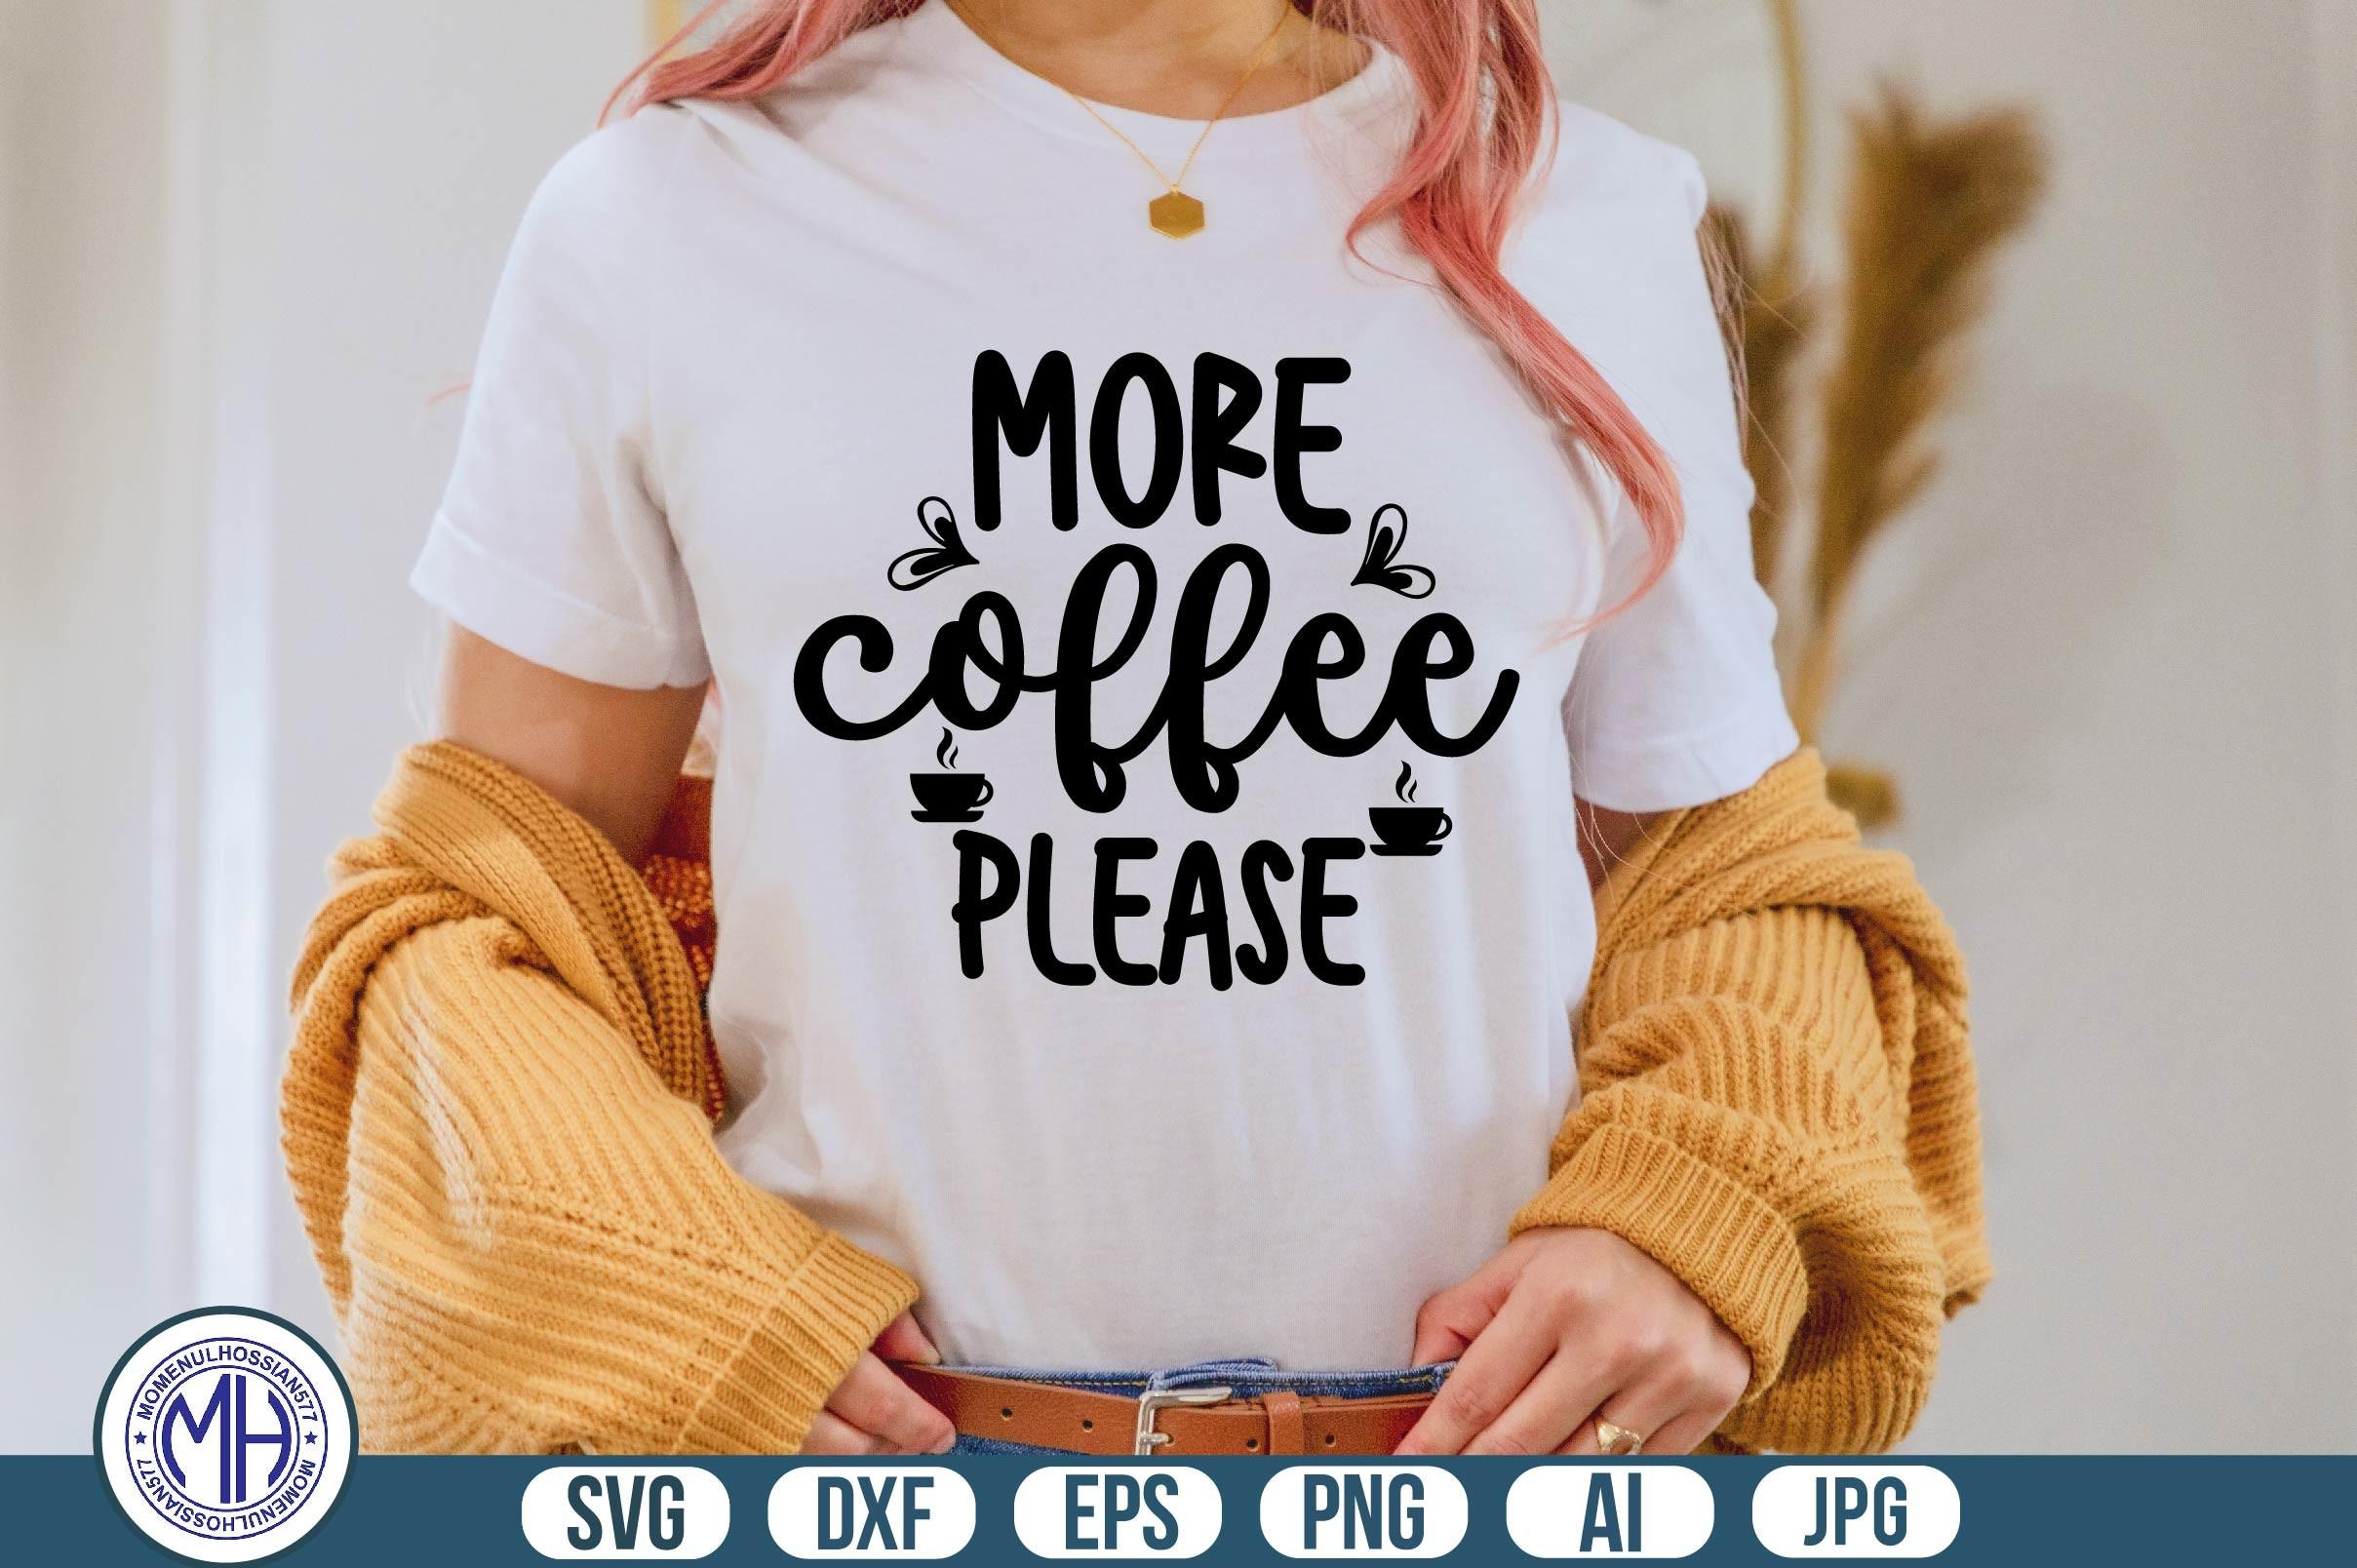 More Coffee Please